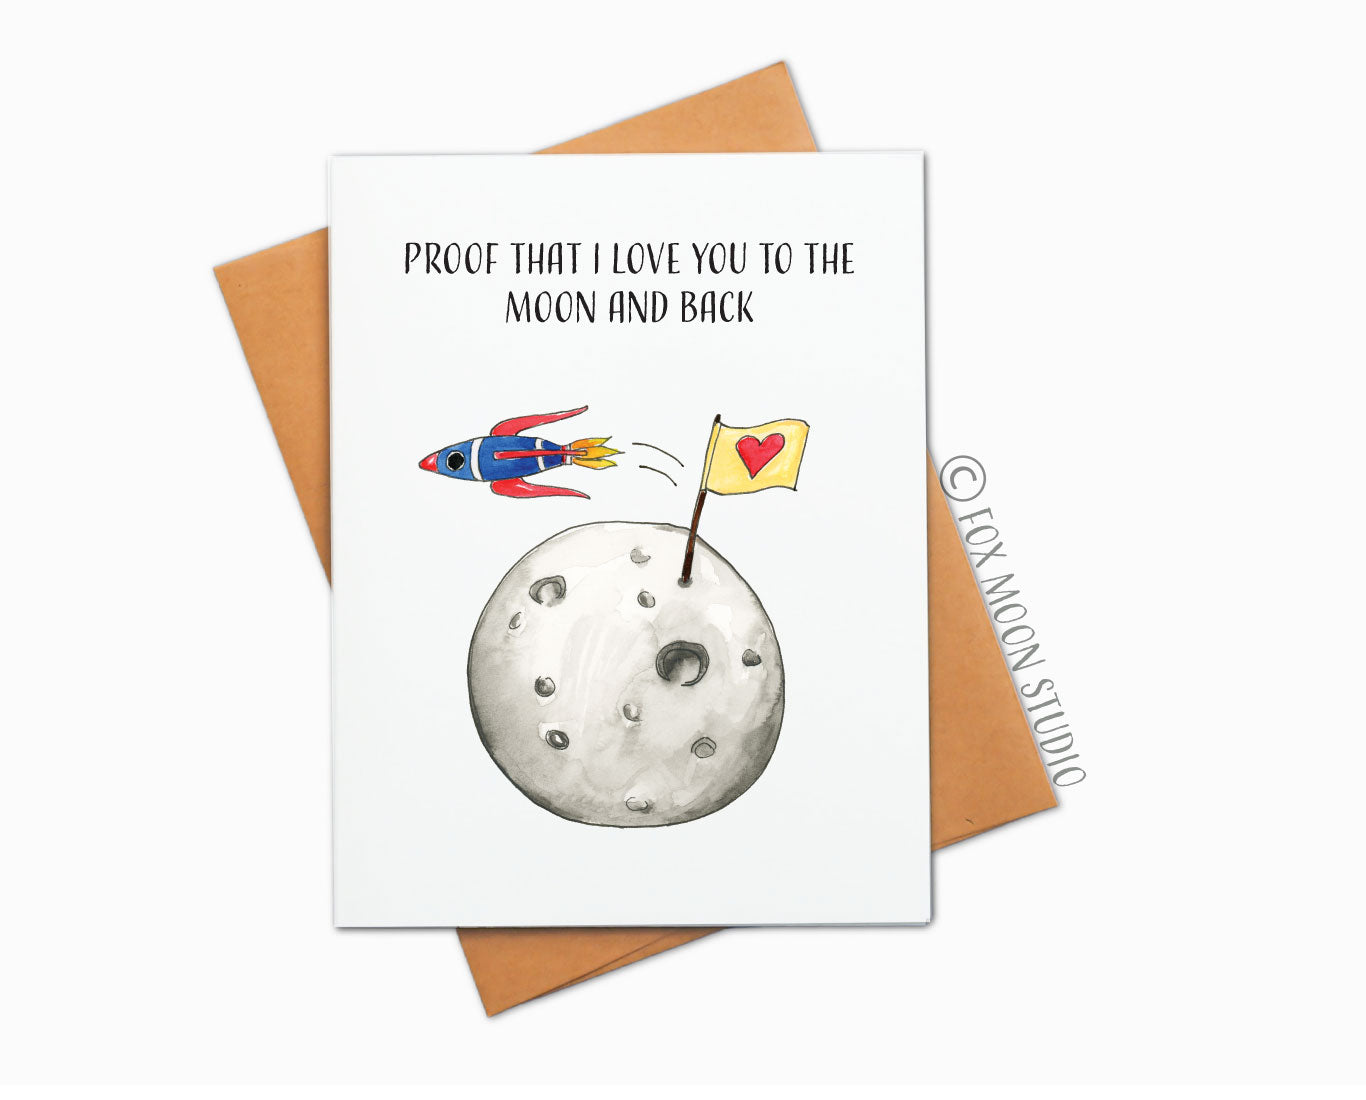 Proof That I Love You to the Moon and Back - Greeting Card